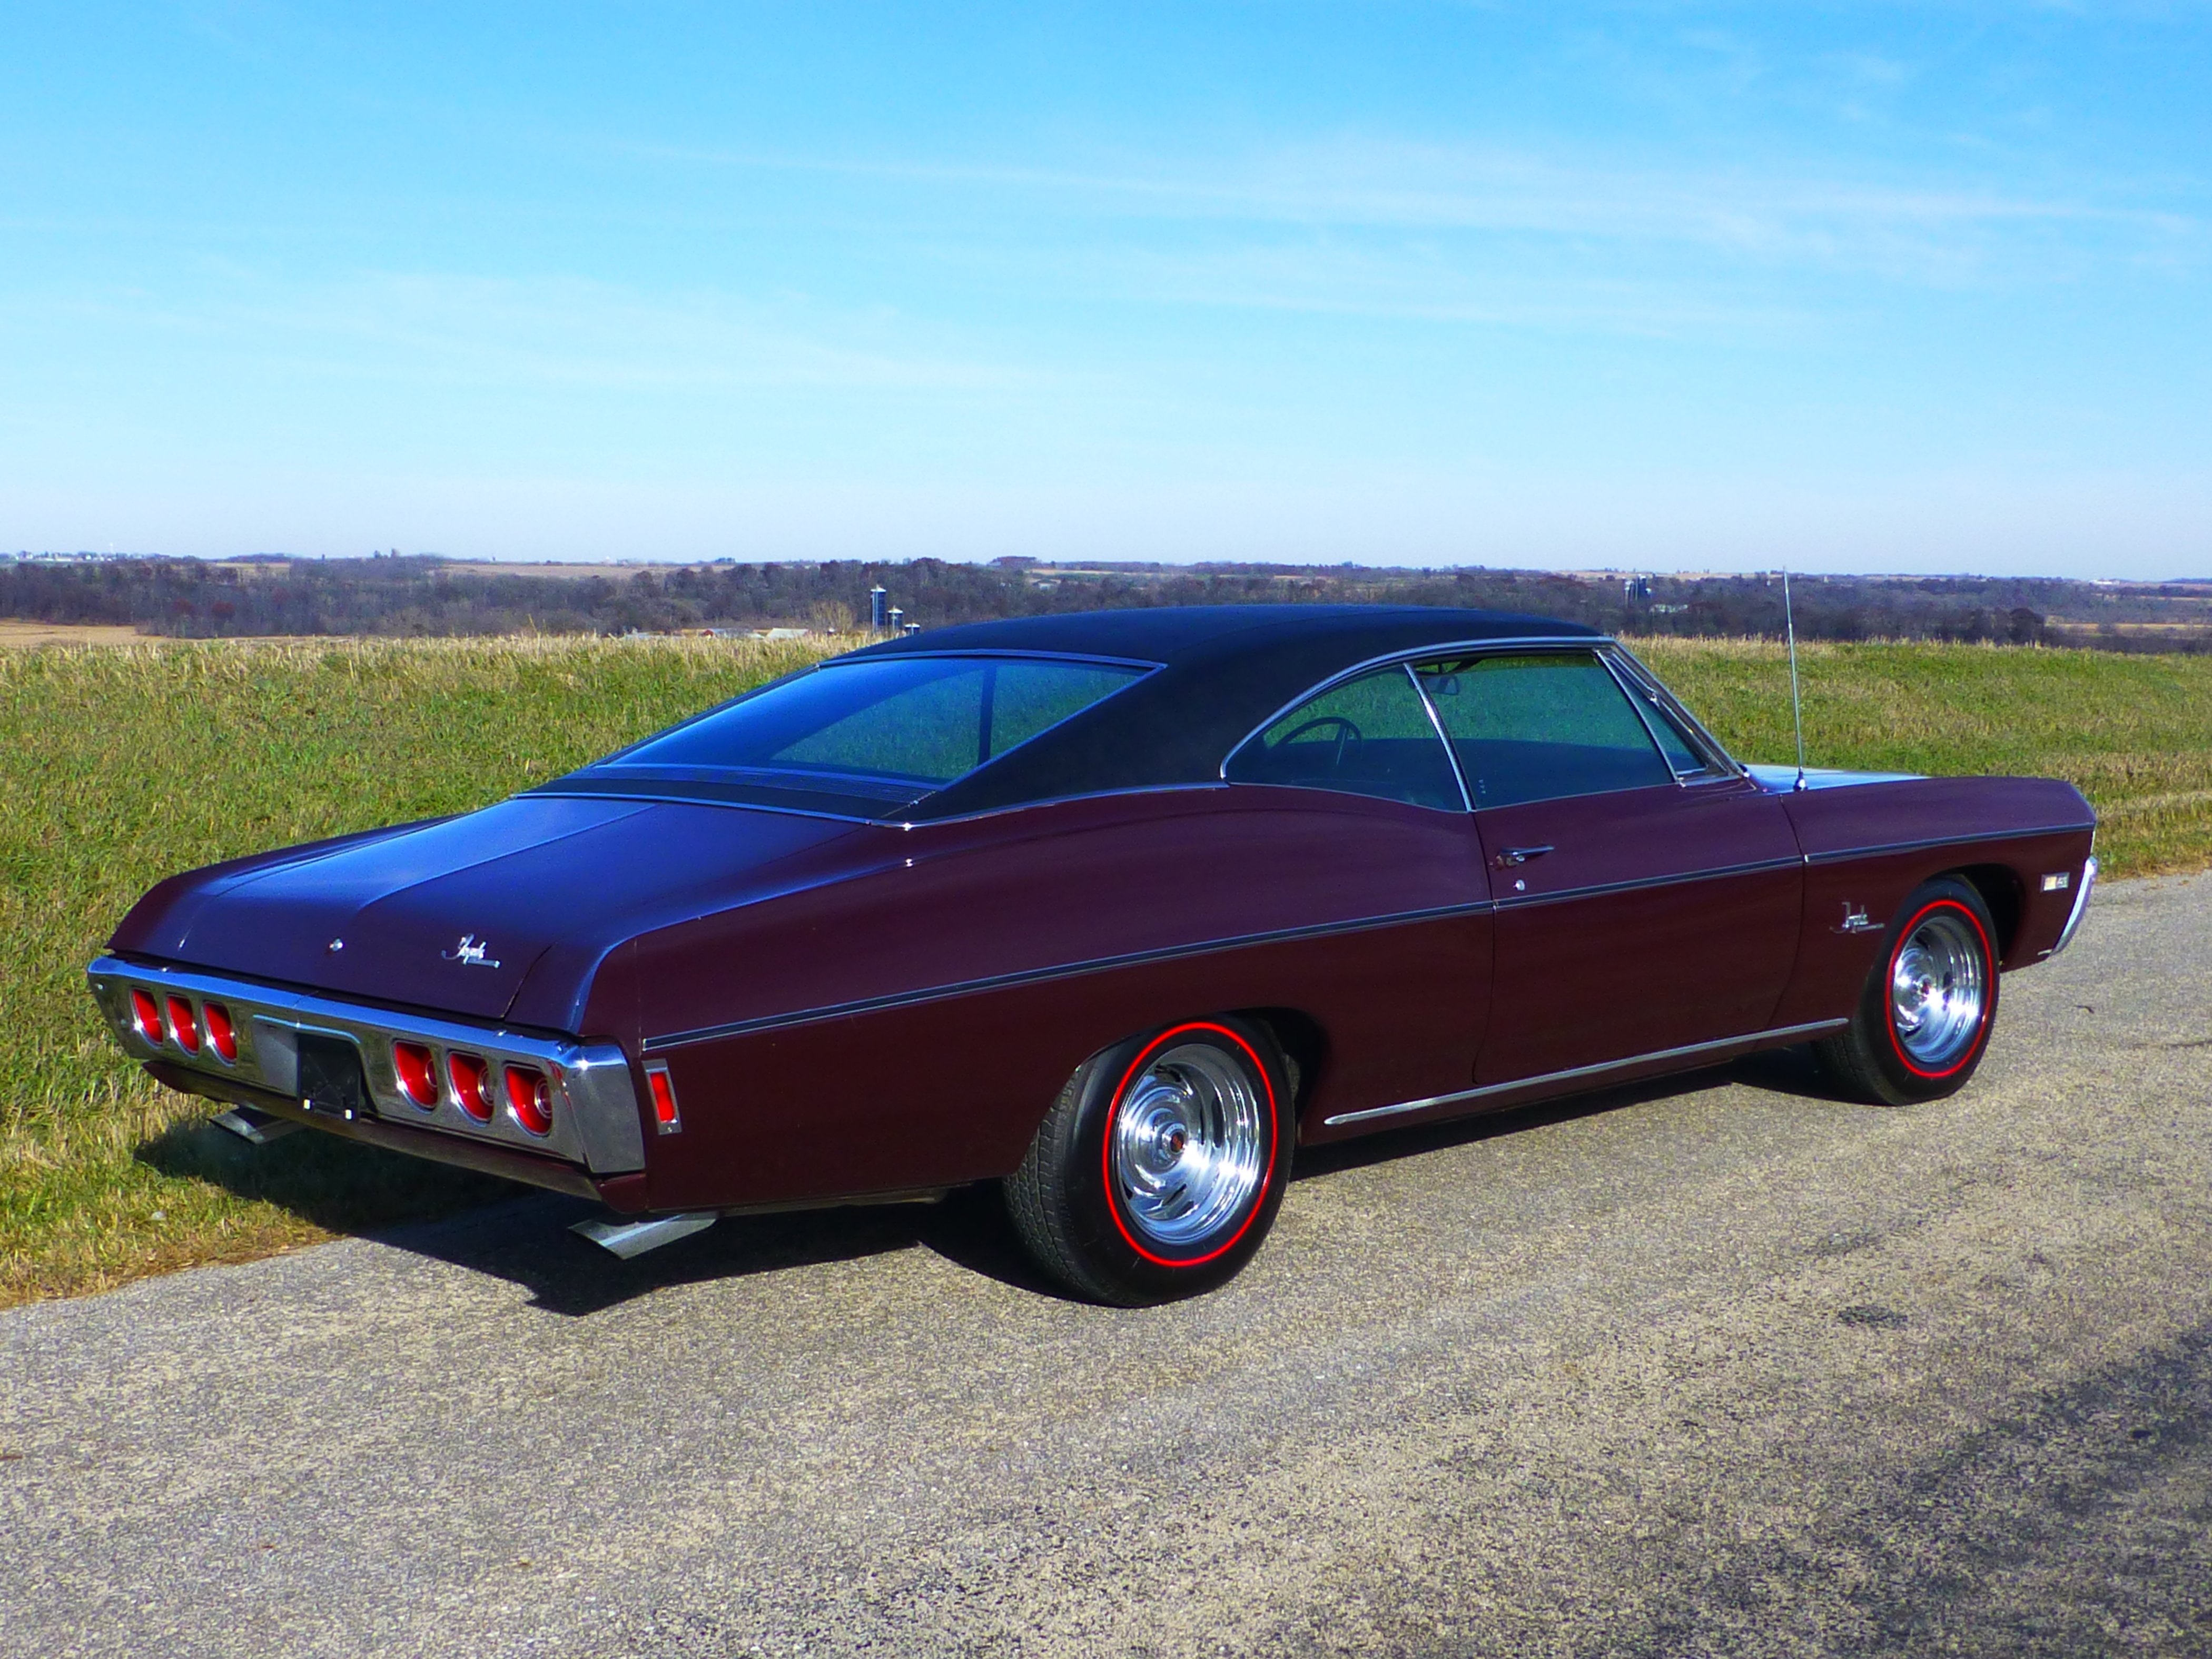 1968, Chevrolet, Impala, Ss, Coupe, Hardtop, Muscle, Classic, Usa, 4200x3150 03 Wallpaper